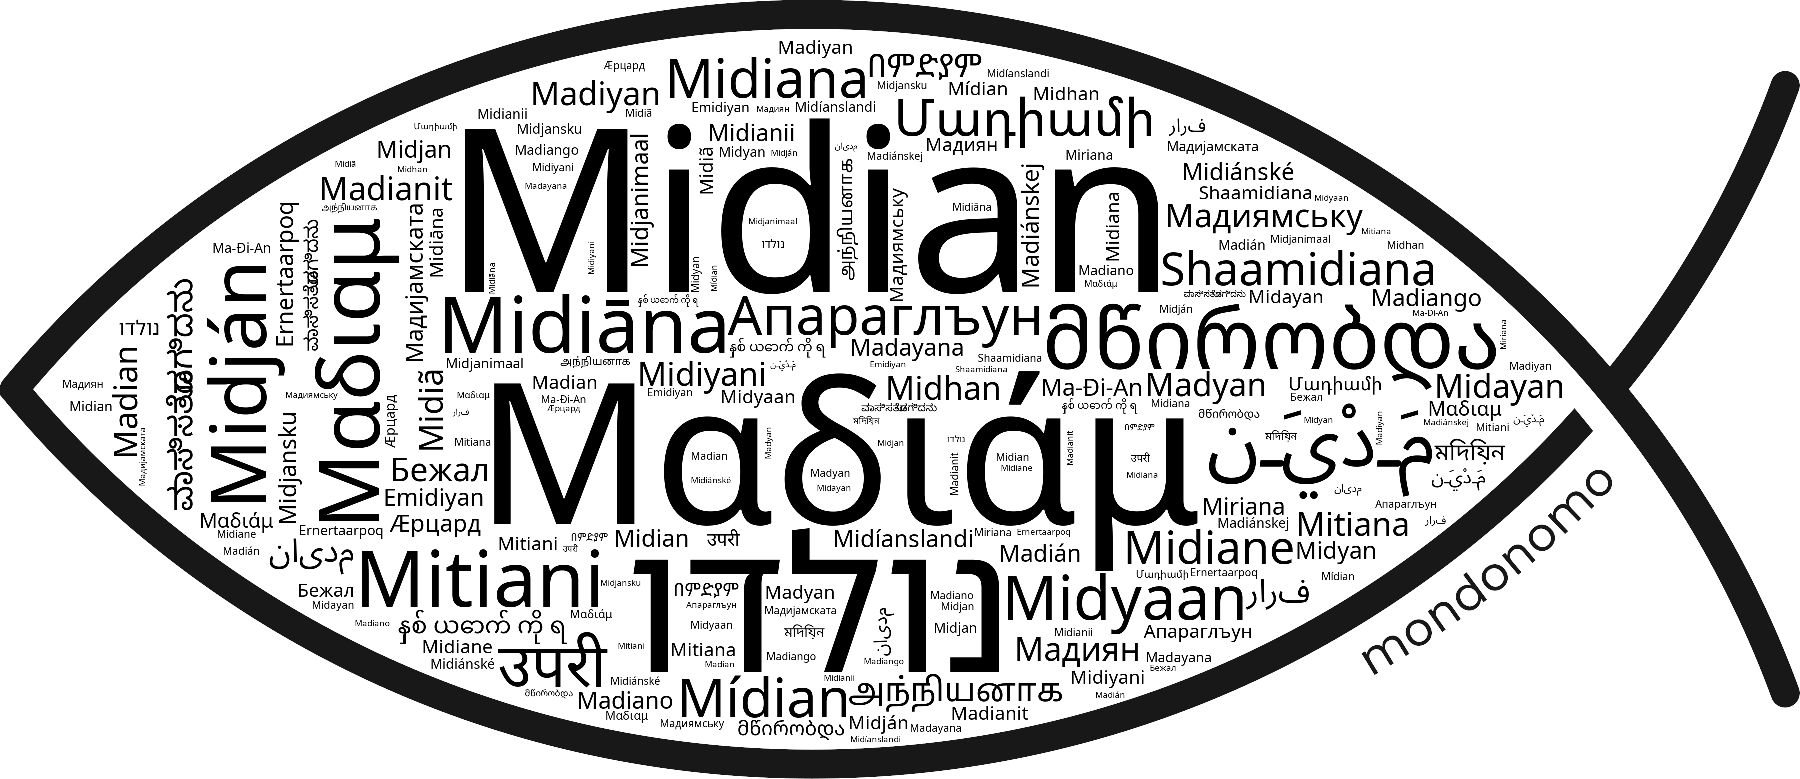 Name Midian in the world's Bibles